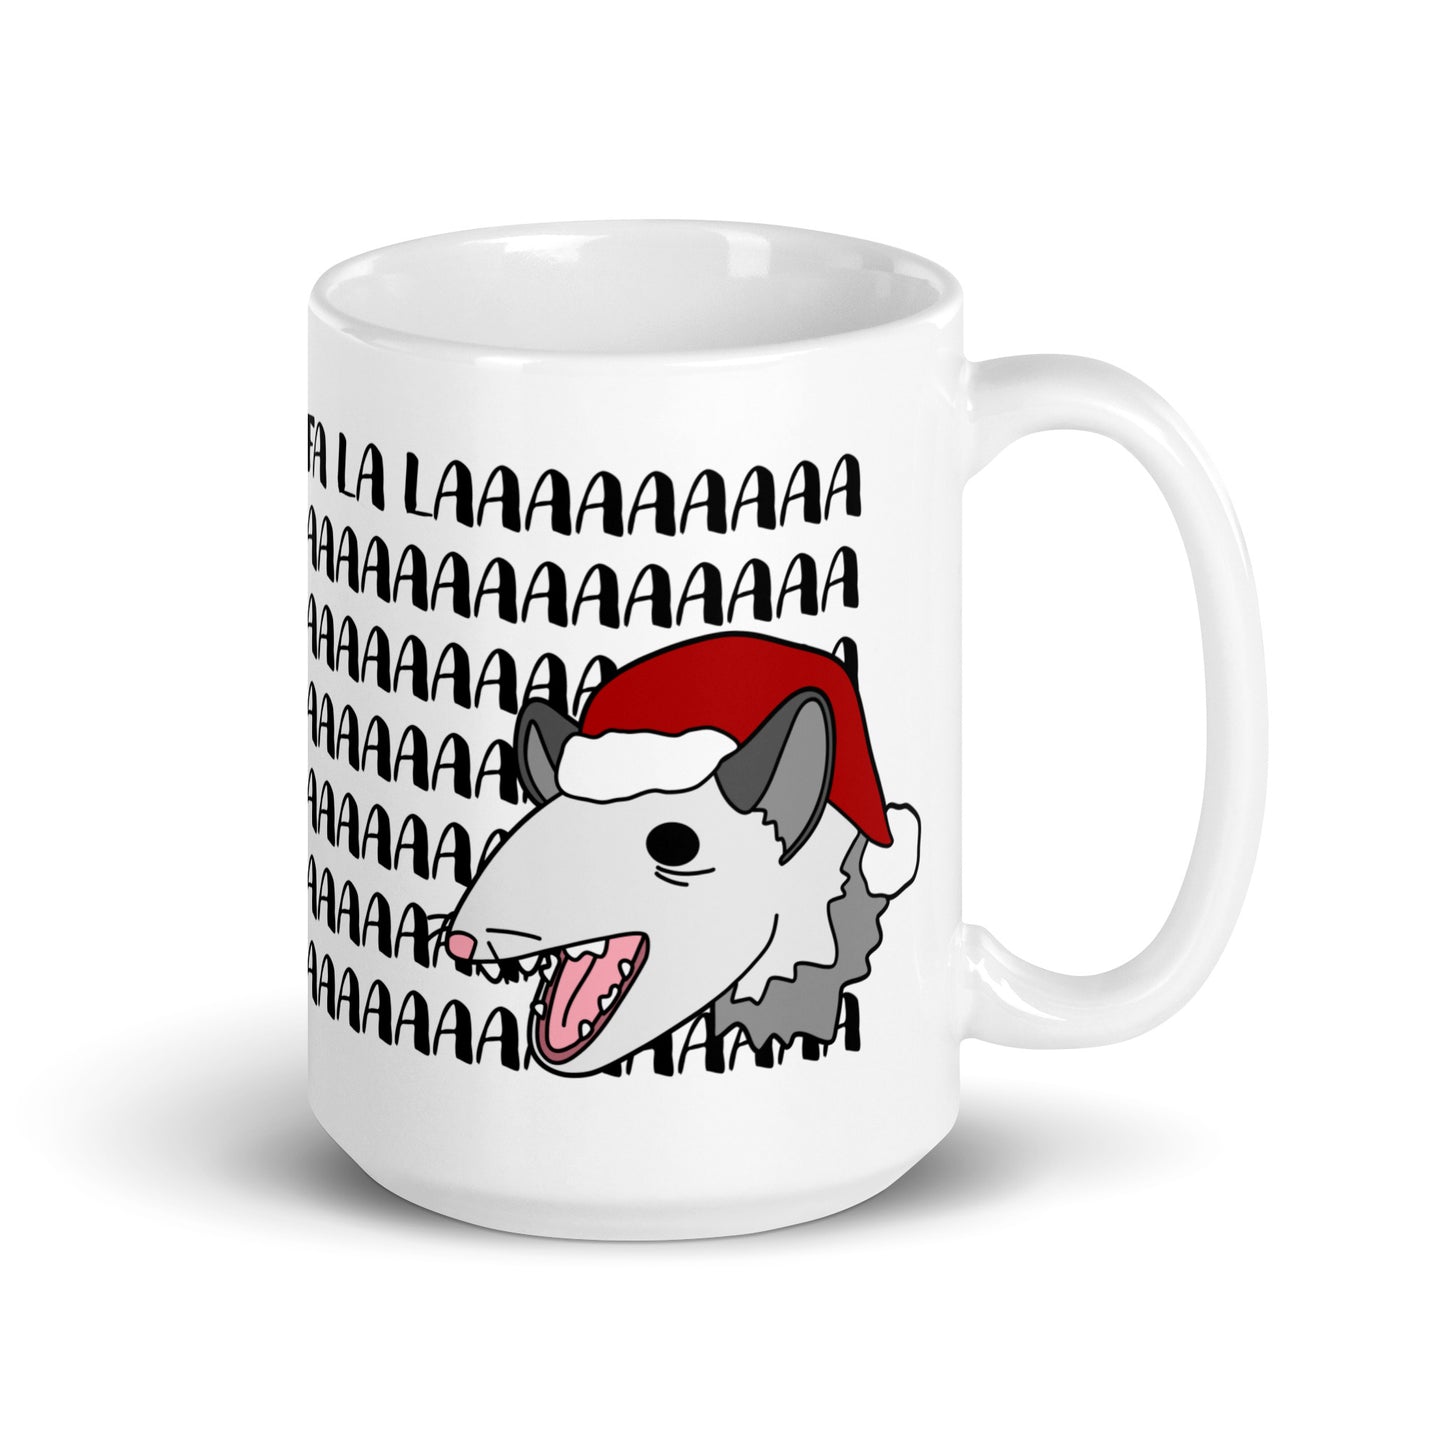 A white 15 ounce mug featuring an illustration of a possum wearing a Santa hat. The possum appears to be screaming, and text behind his head reads "FA LA LAAAAAA"